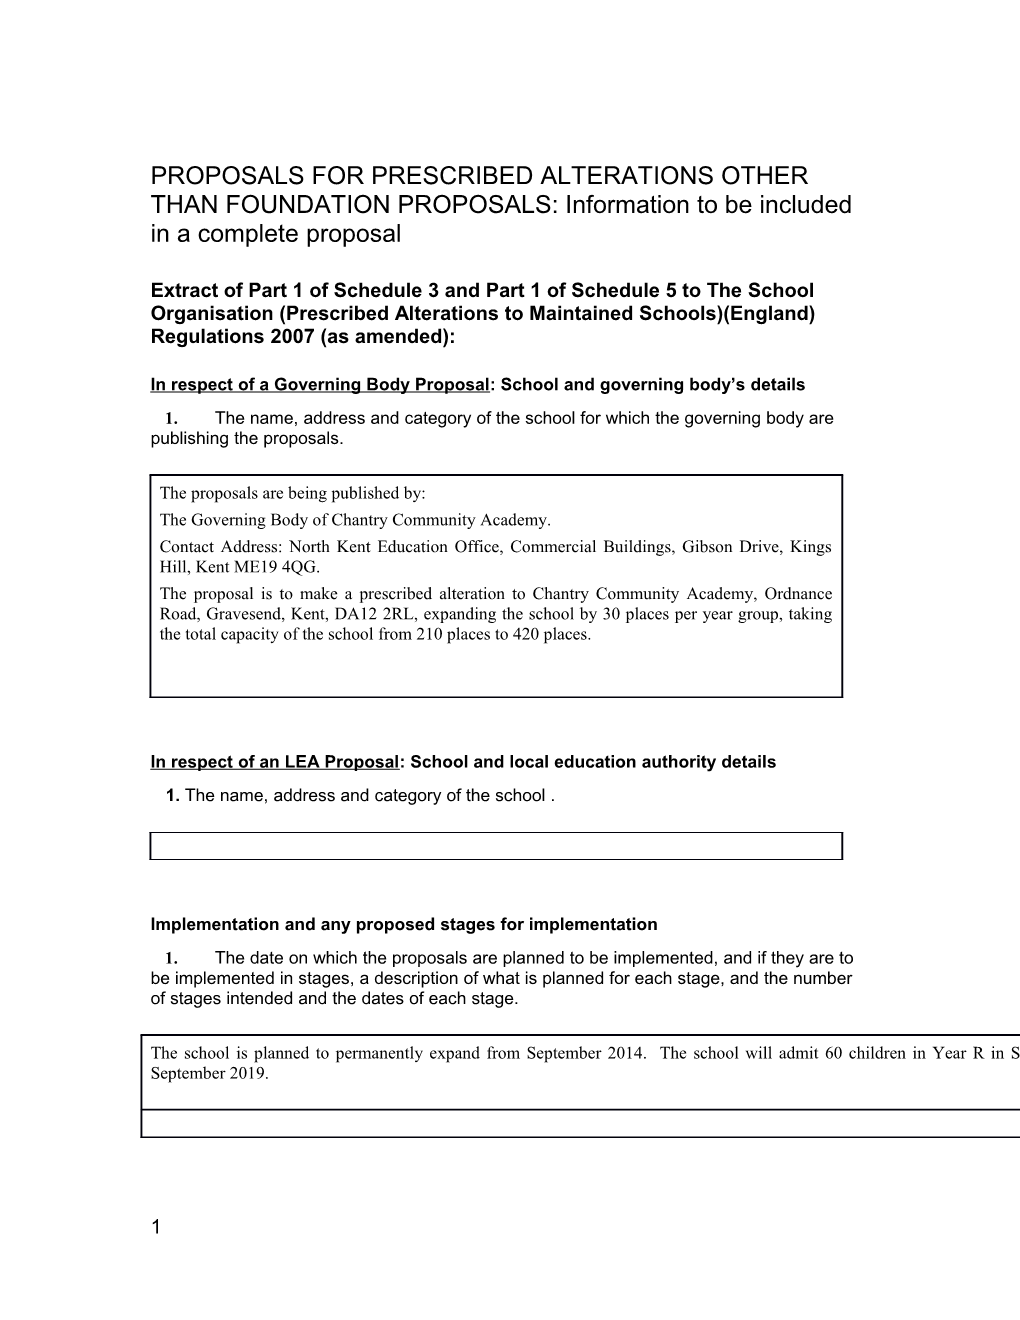 PROPOSALS for PRESCRIBED ALTERATIONS OTHER THAN FOUNDATION PROPOSALS: Information to Be